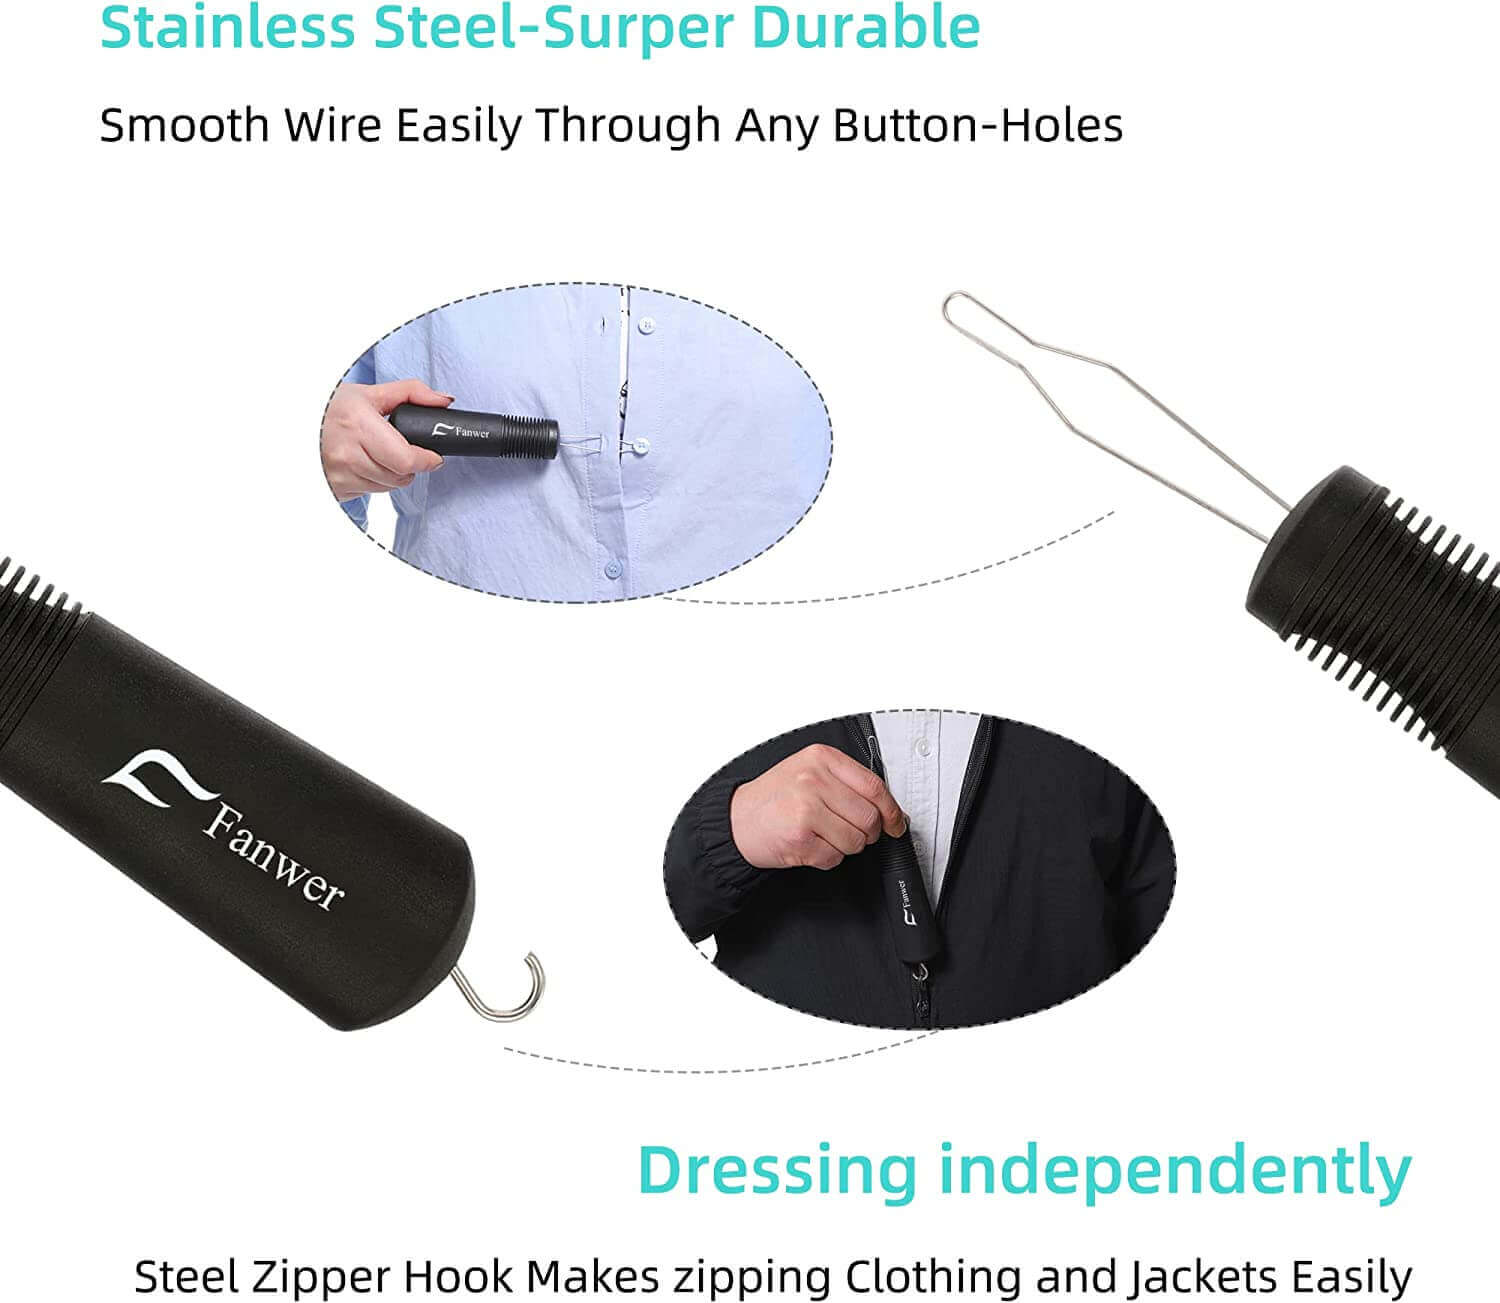 RMS Button Hook with Zipper Pull - Button Assist Device with Comfort & Wide Grip Shirt & Coat Buttoning Aid Ideal for Limited Dexterity Caused by